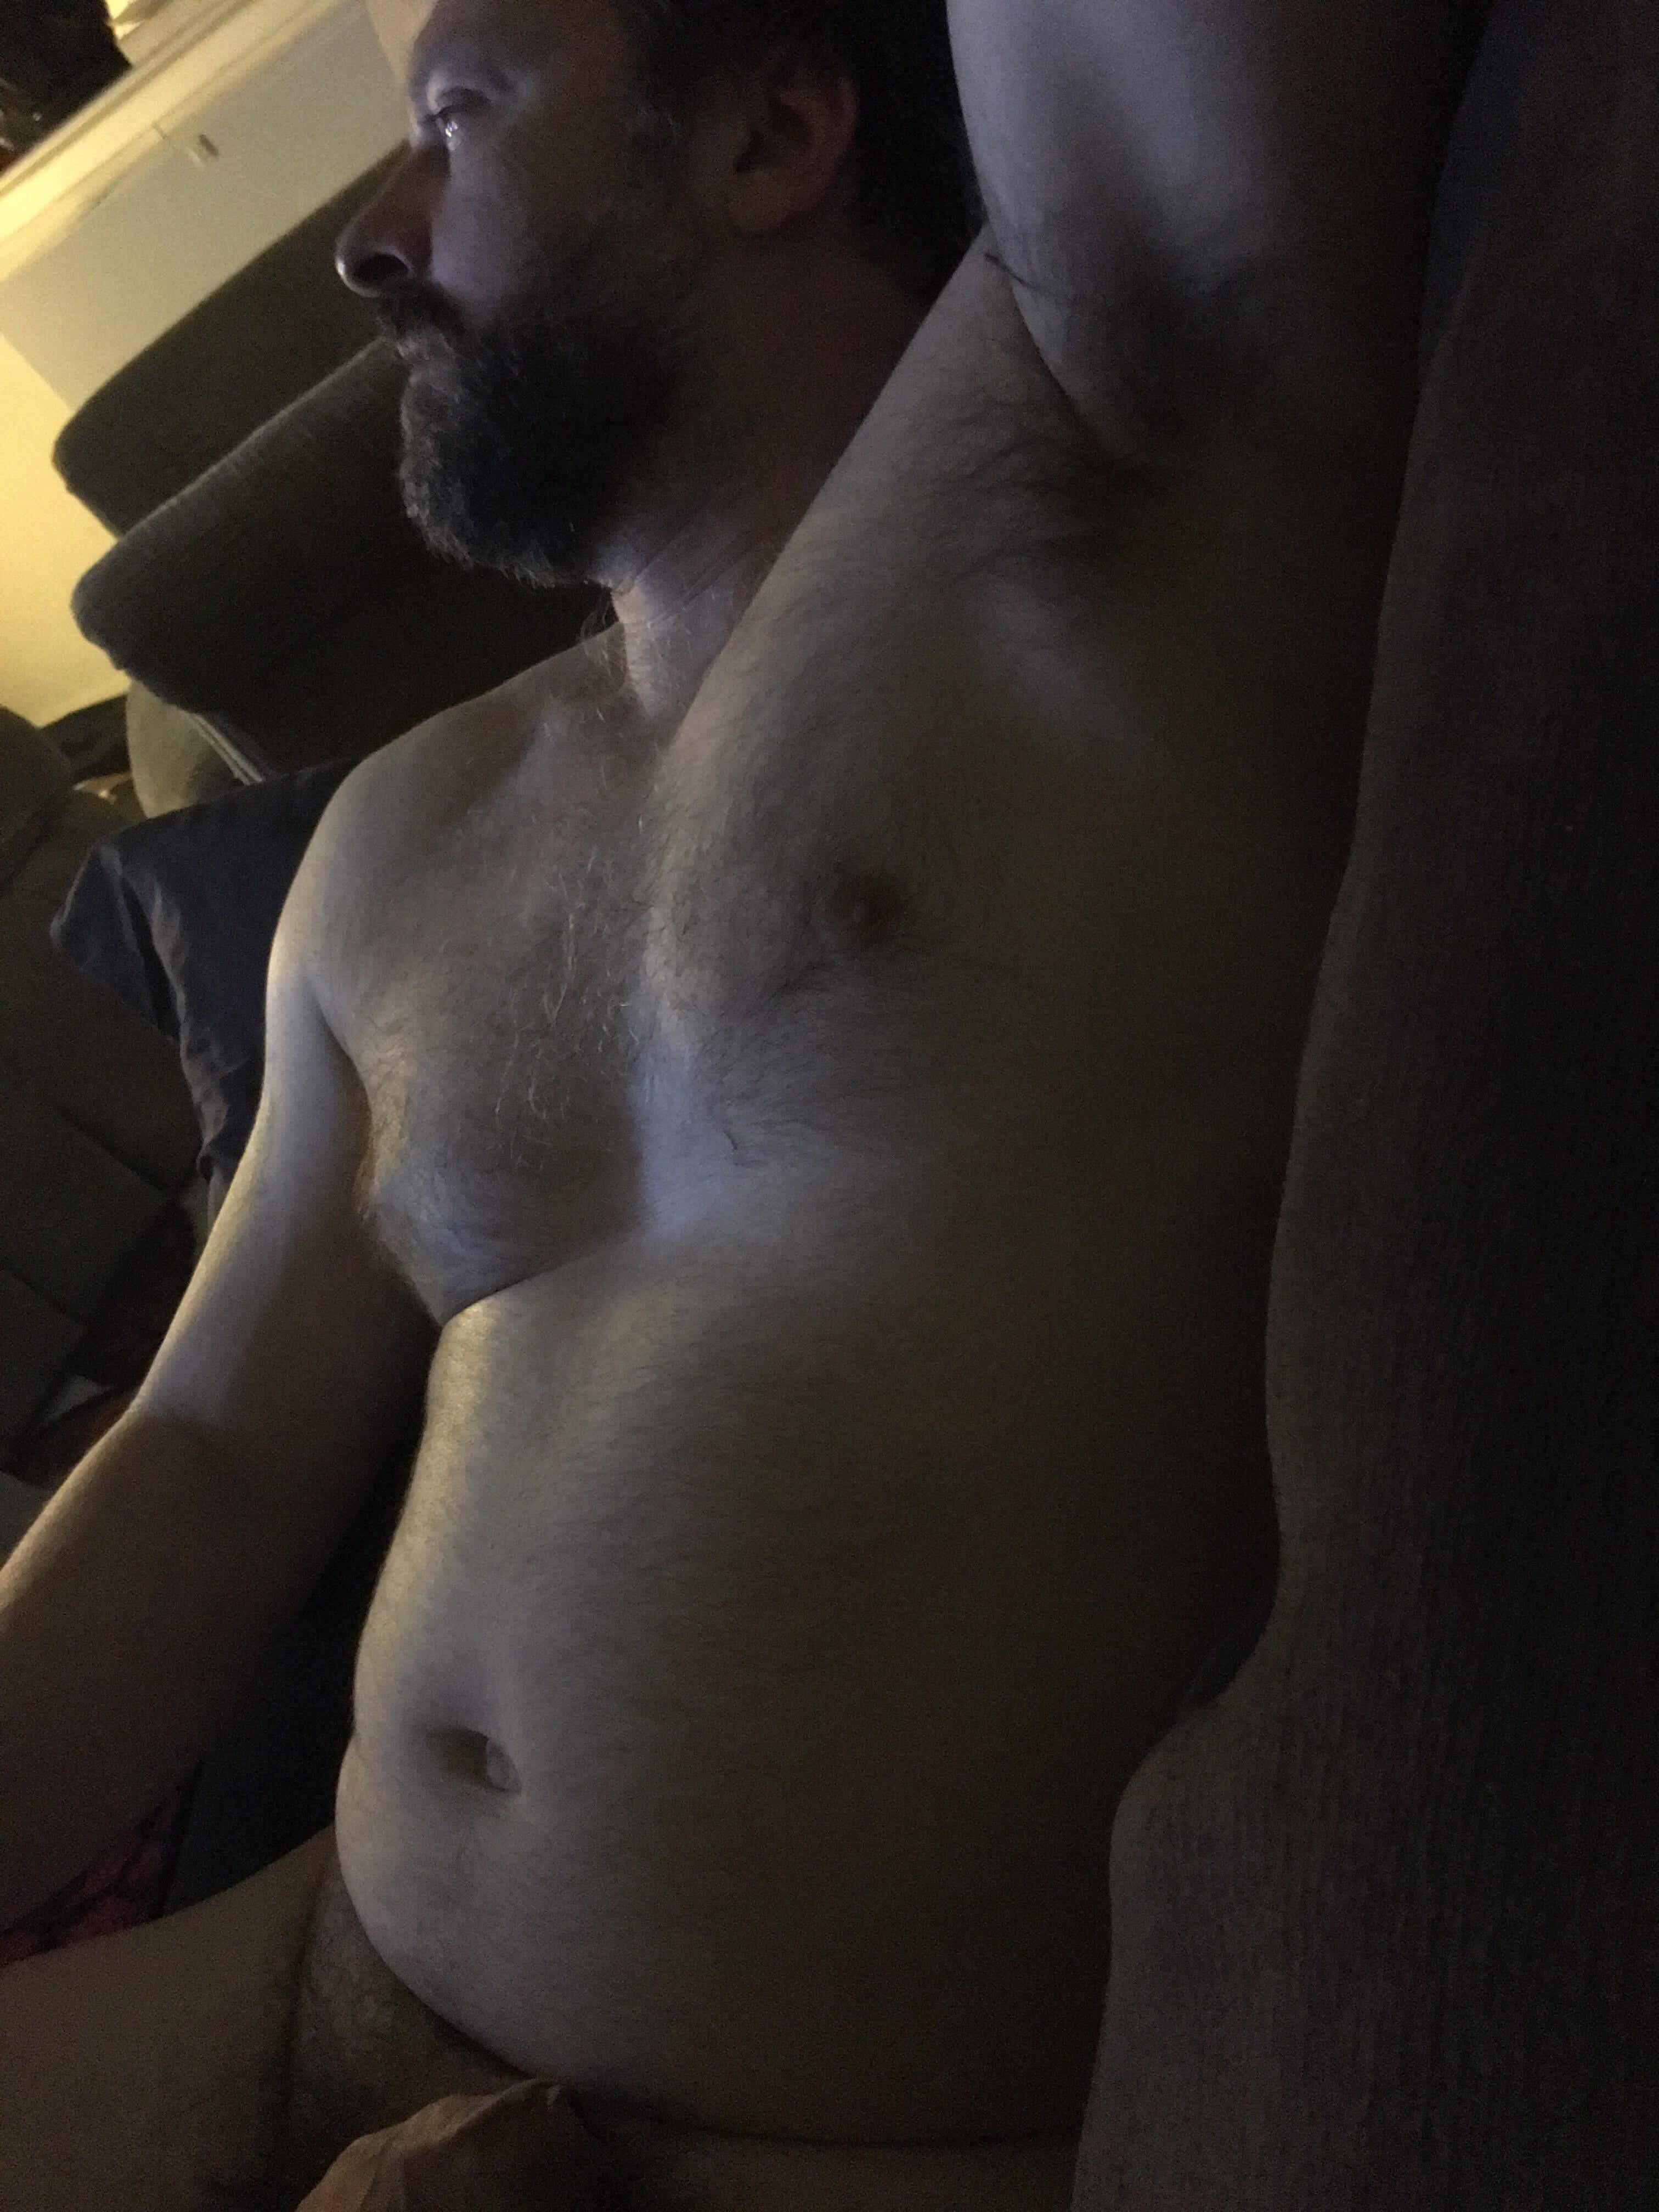 [46] relaxing with my girlfriend after a 3some with our friend